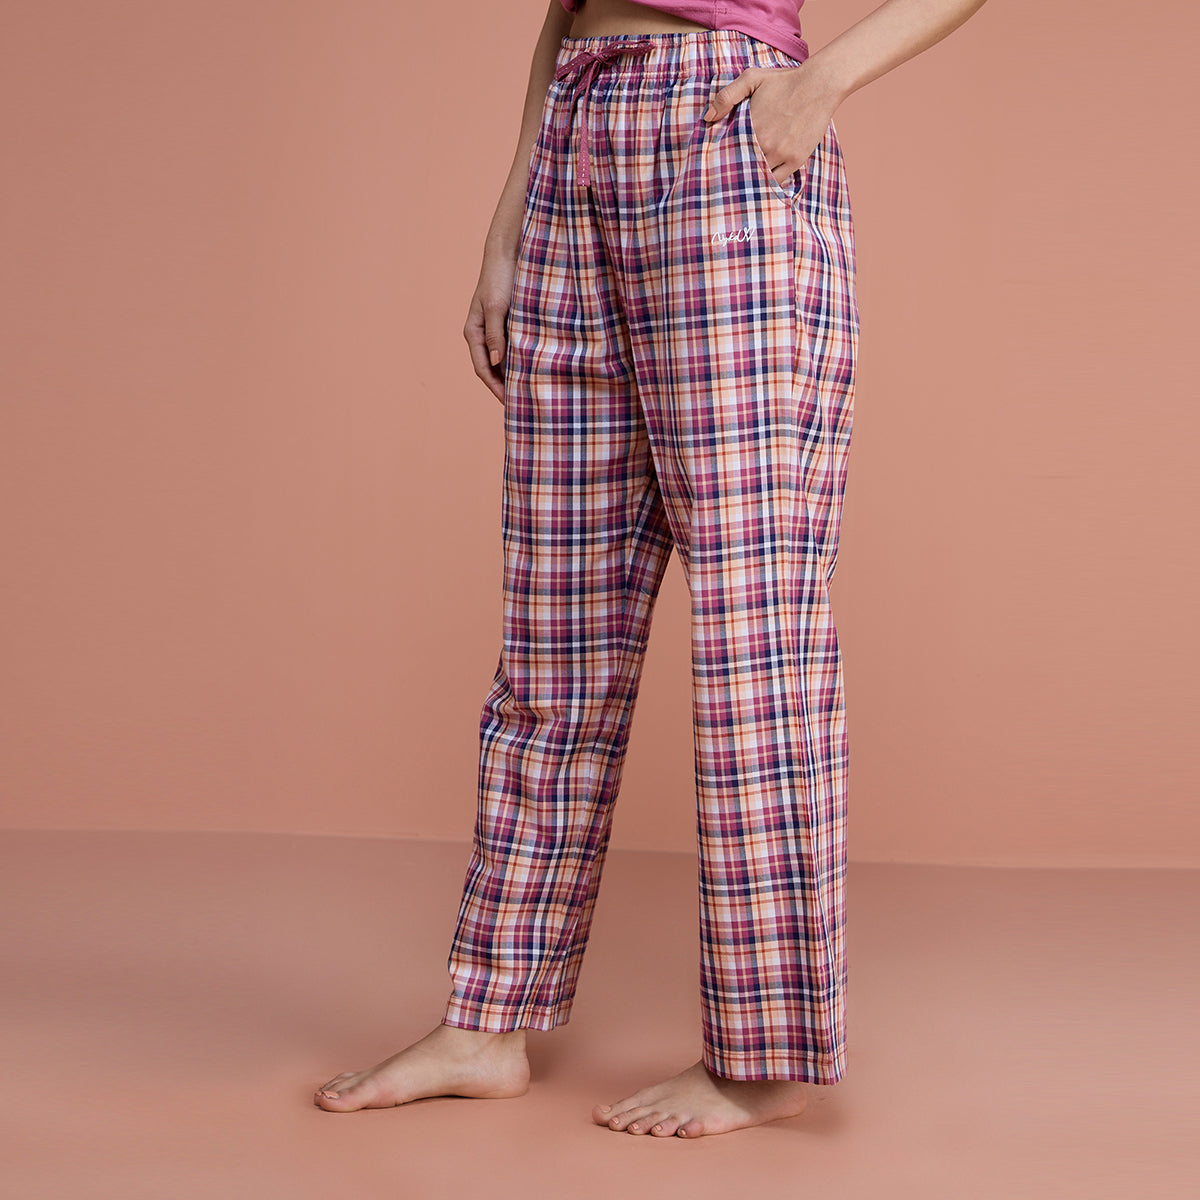 Nykd By Nykaa Super Comfy Cotton Relax Fit Pajama-NYS141-Red Violet Plaid